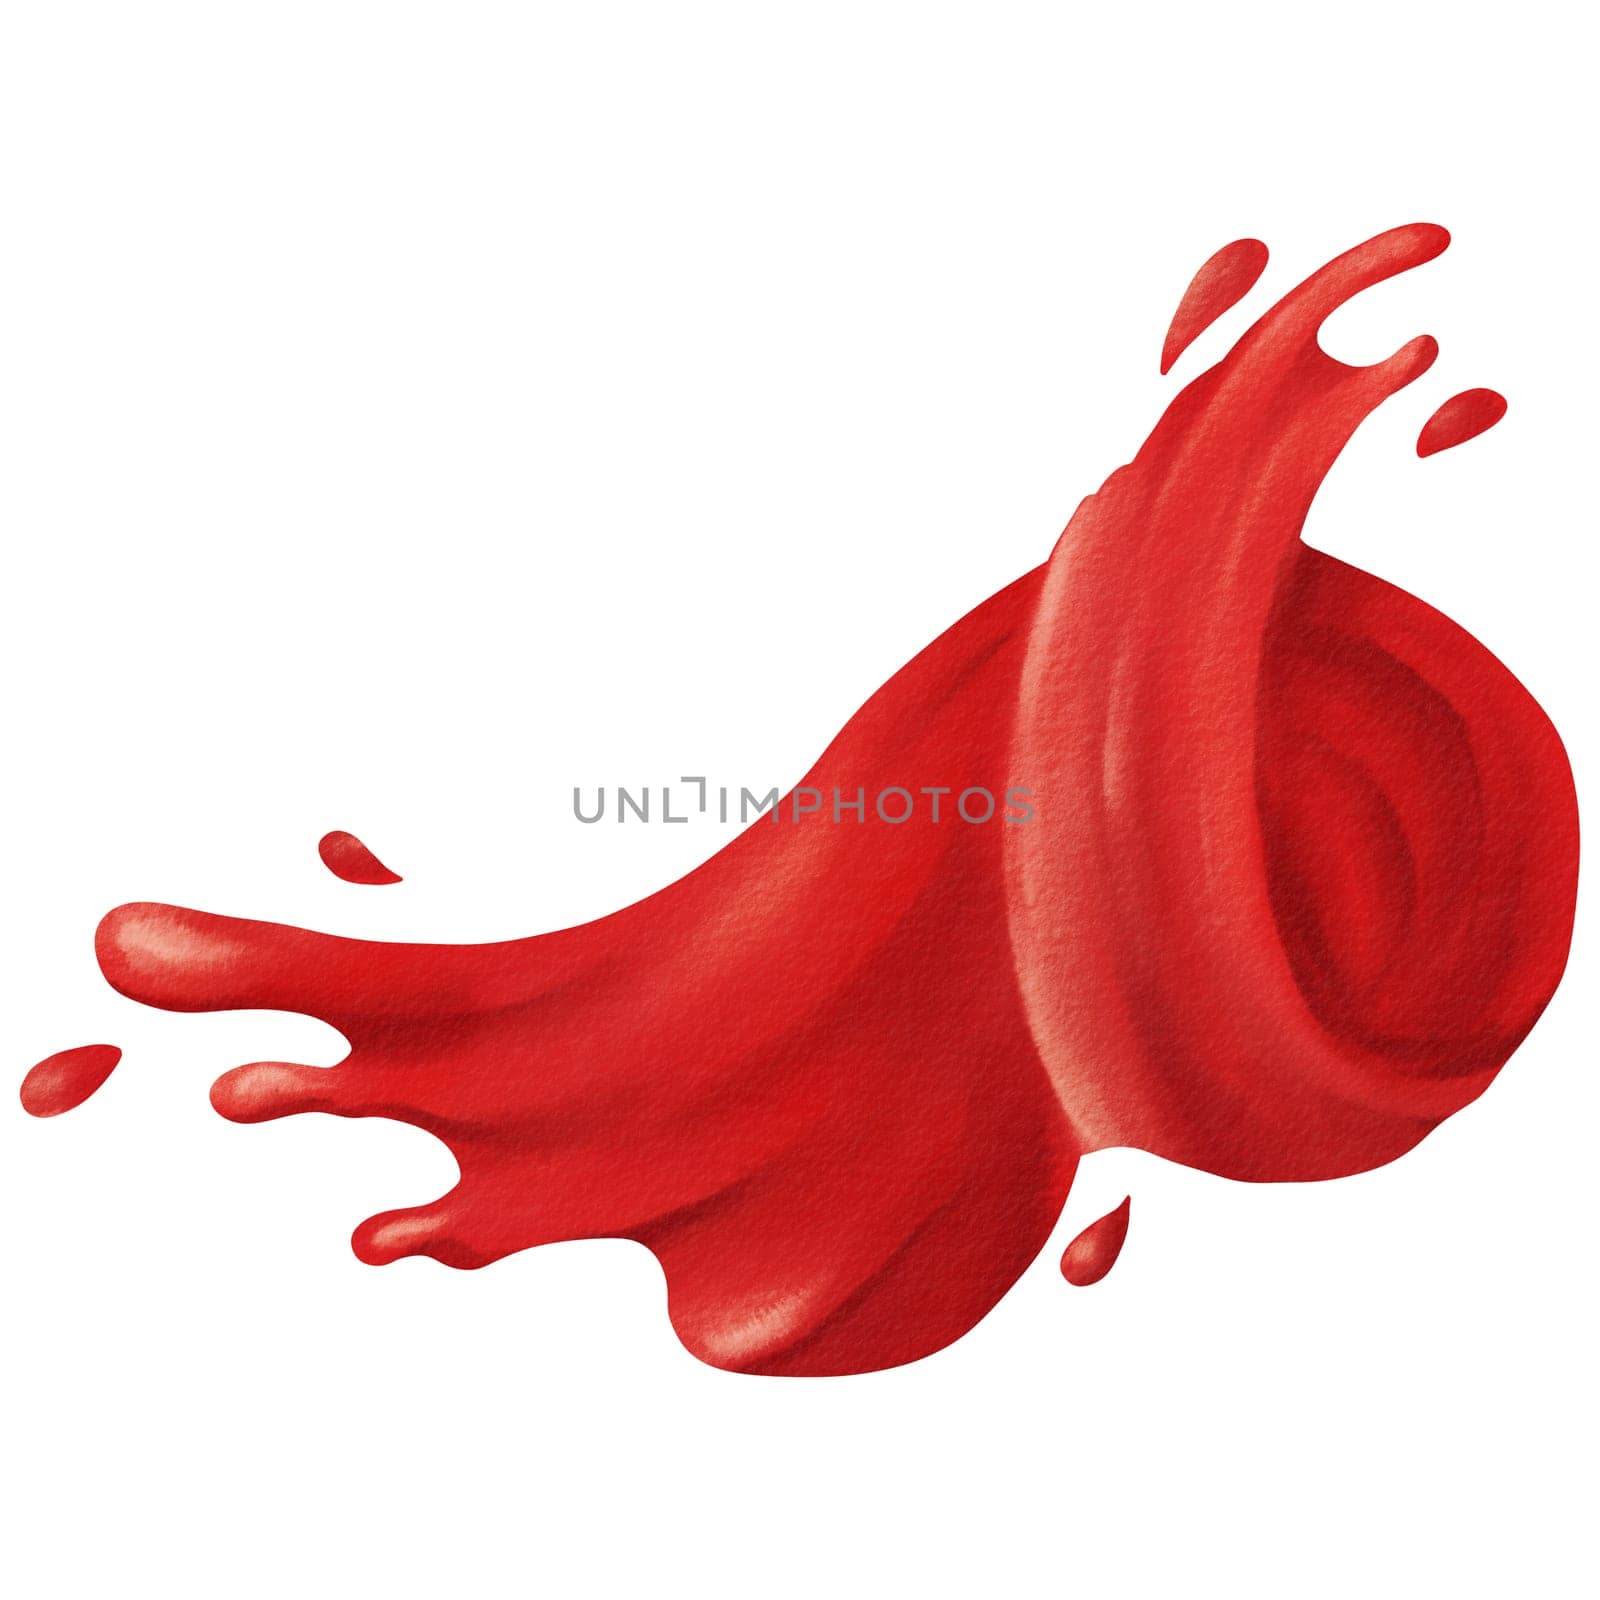 Berry juice splash, swirl of fruit and berry compote splashing. Splash of wine or red juice or blood. liquid of falling clear fruit drink, strawberry, grape or cherry juice. watercolor illustration.